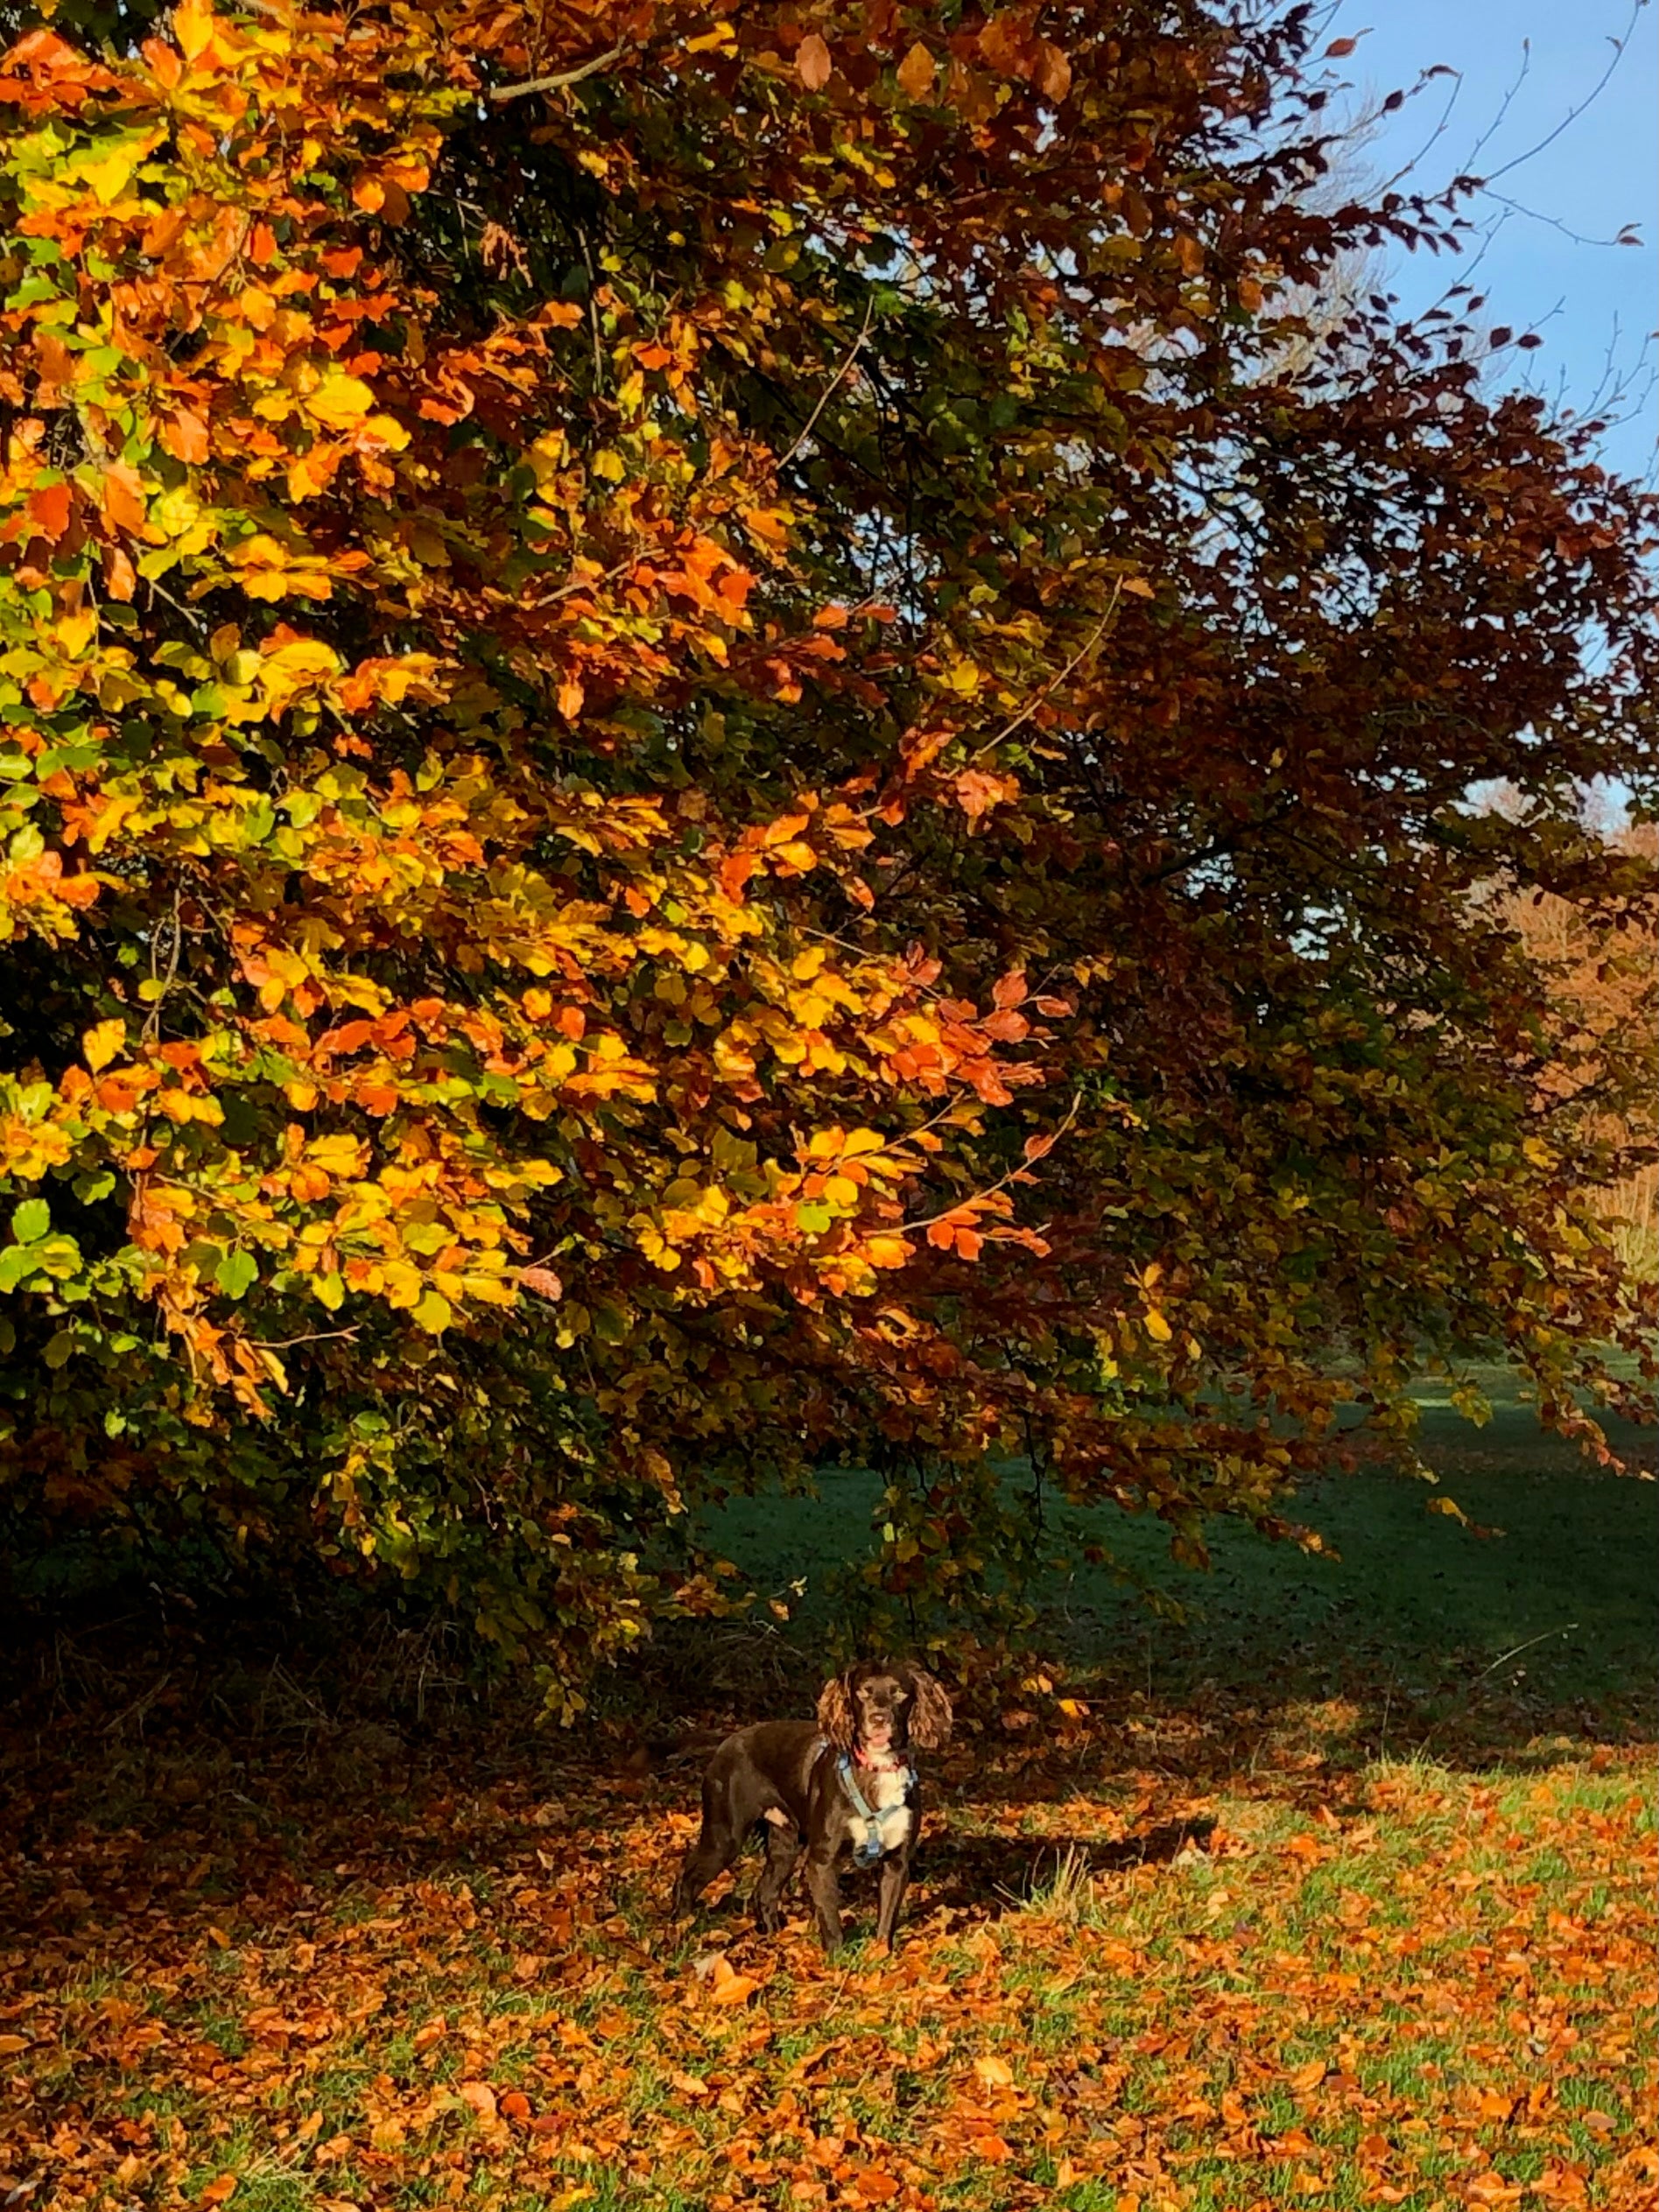 A healthy dog resplendent amid the golden leaves of autumn